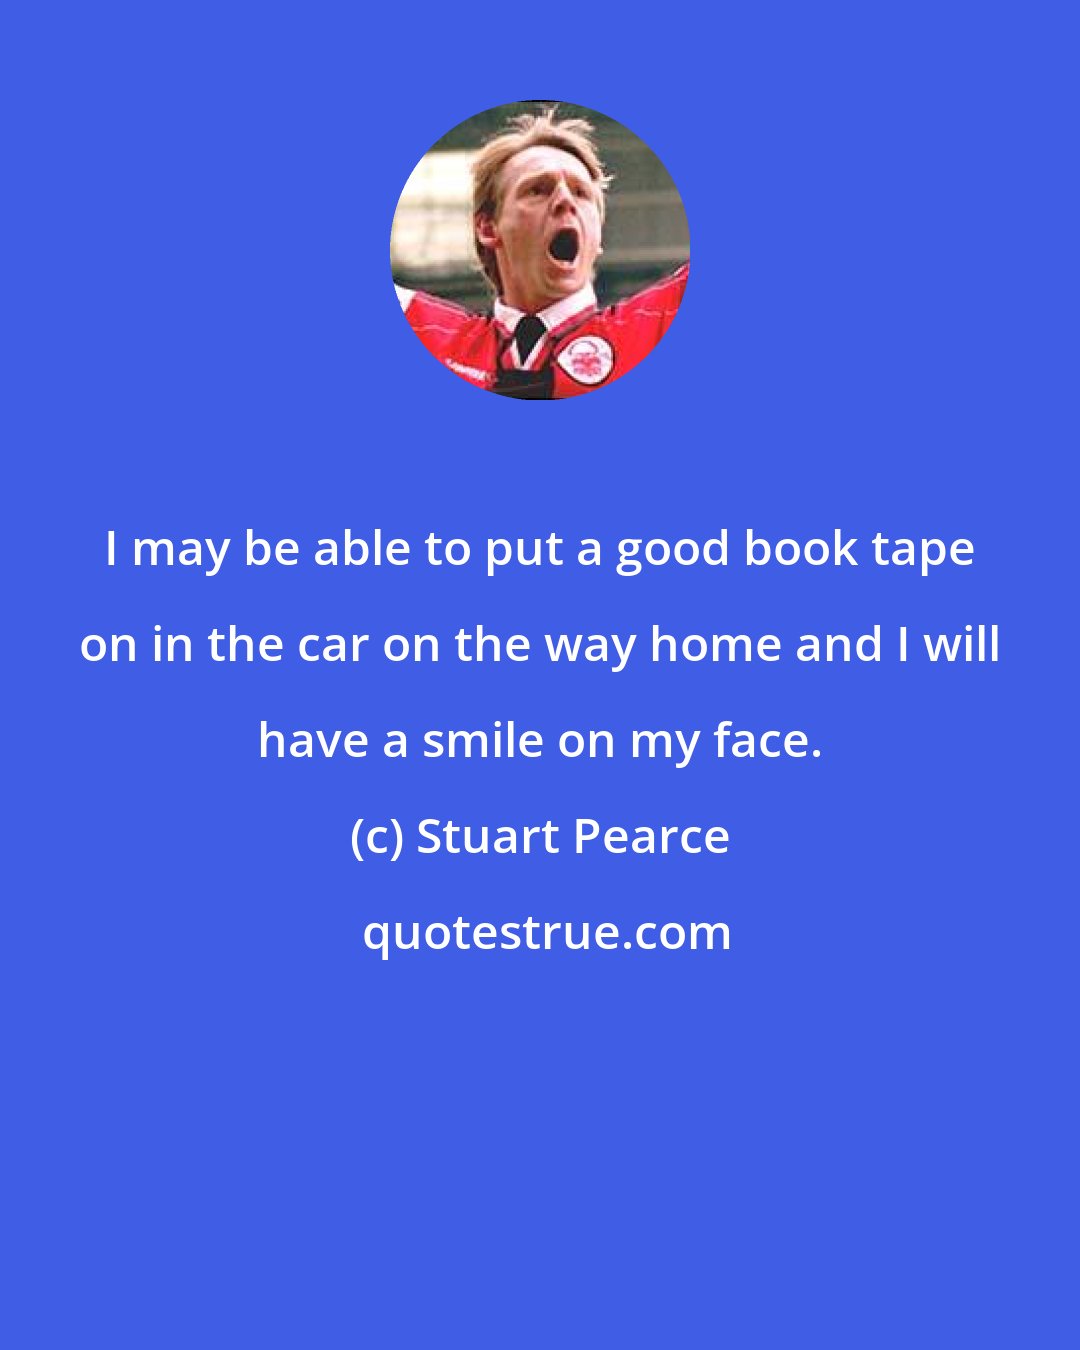 Stuart Pearce: I may be able to put a good book tape on in the car on the way home and I will have a smile on my face.